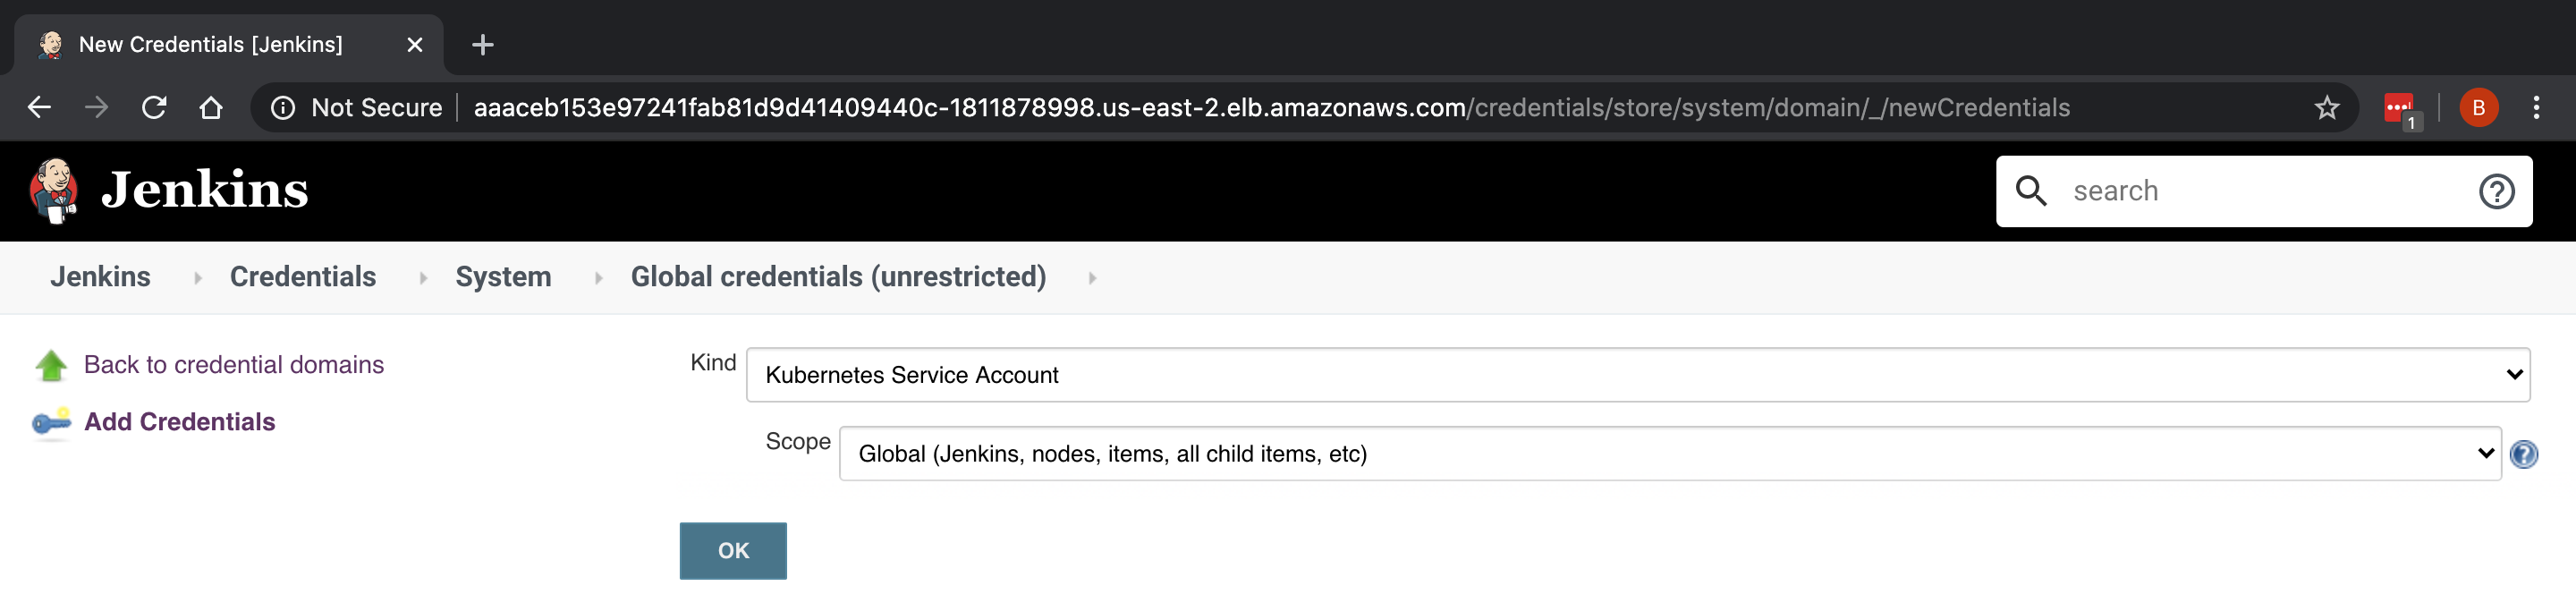 Integrating Anchore Vulnerability Scanning and Compliance and Adding Kubernetes Service Account Credentials in Jenkins